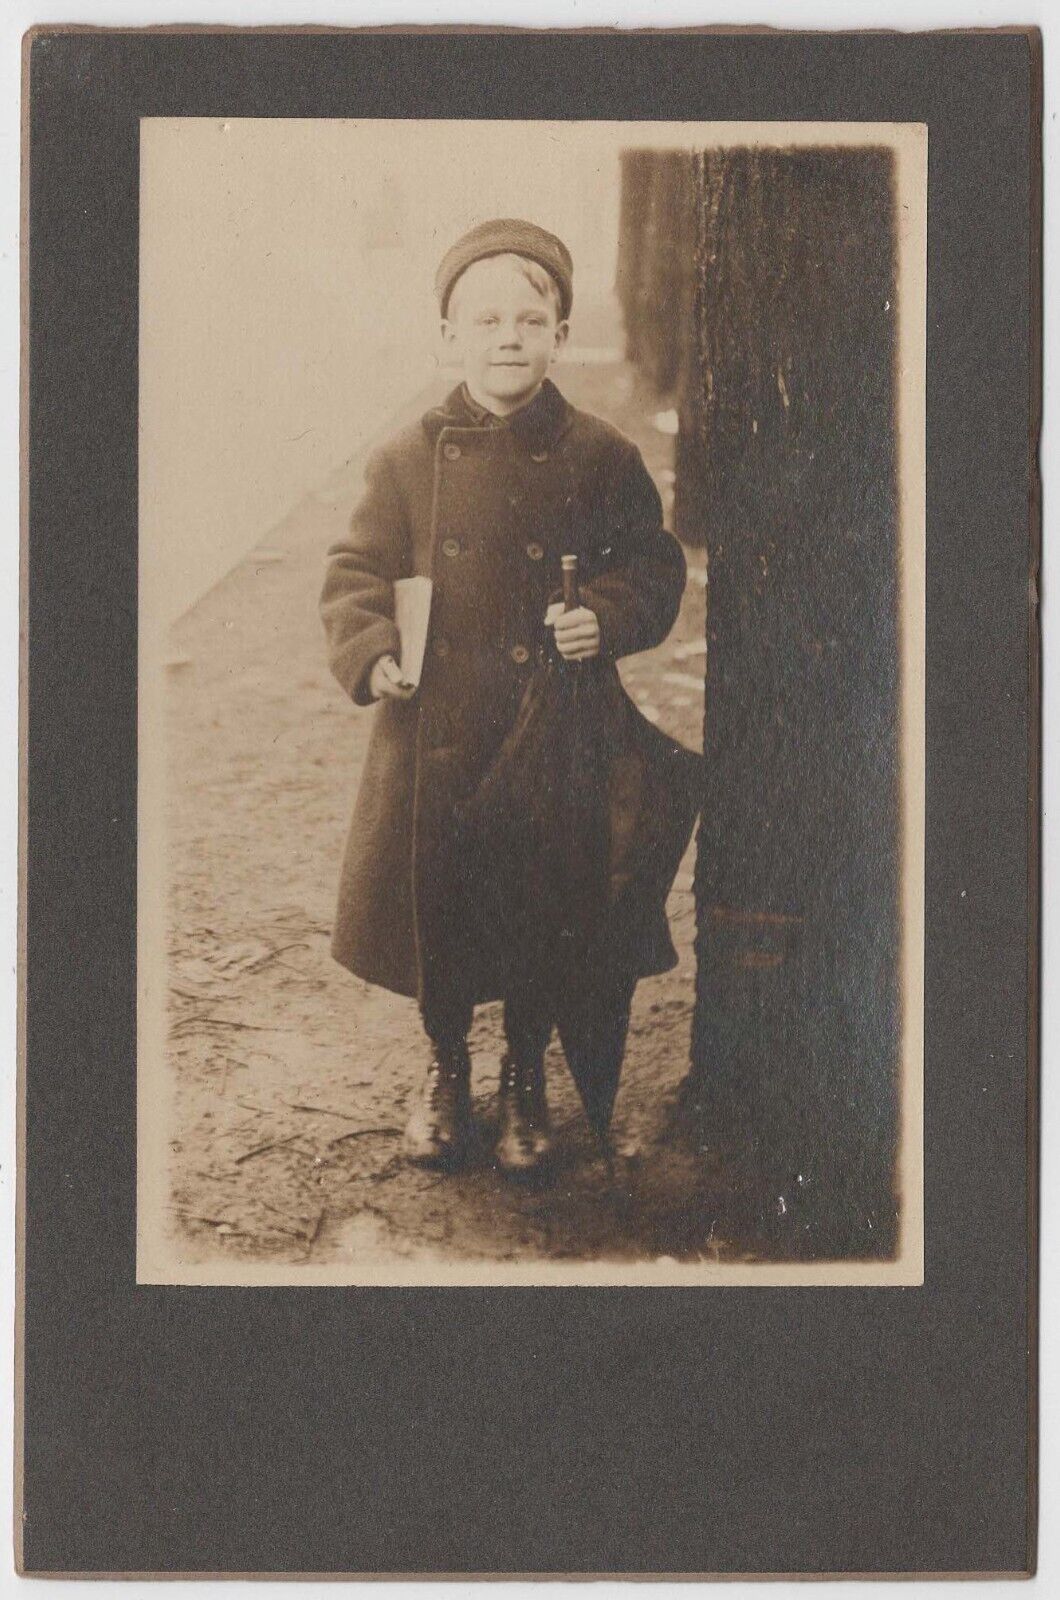 CIRCA 1900s CABINET CARD YOUNG SCHOOL BOY HOLDING BOOK AND UMBRELLA OUTSIDE